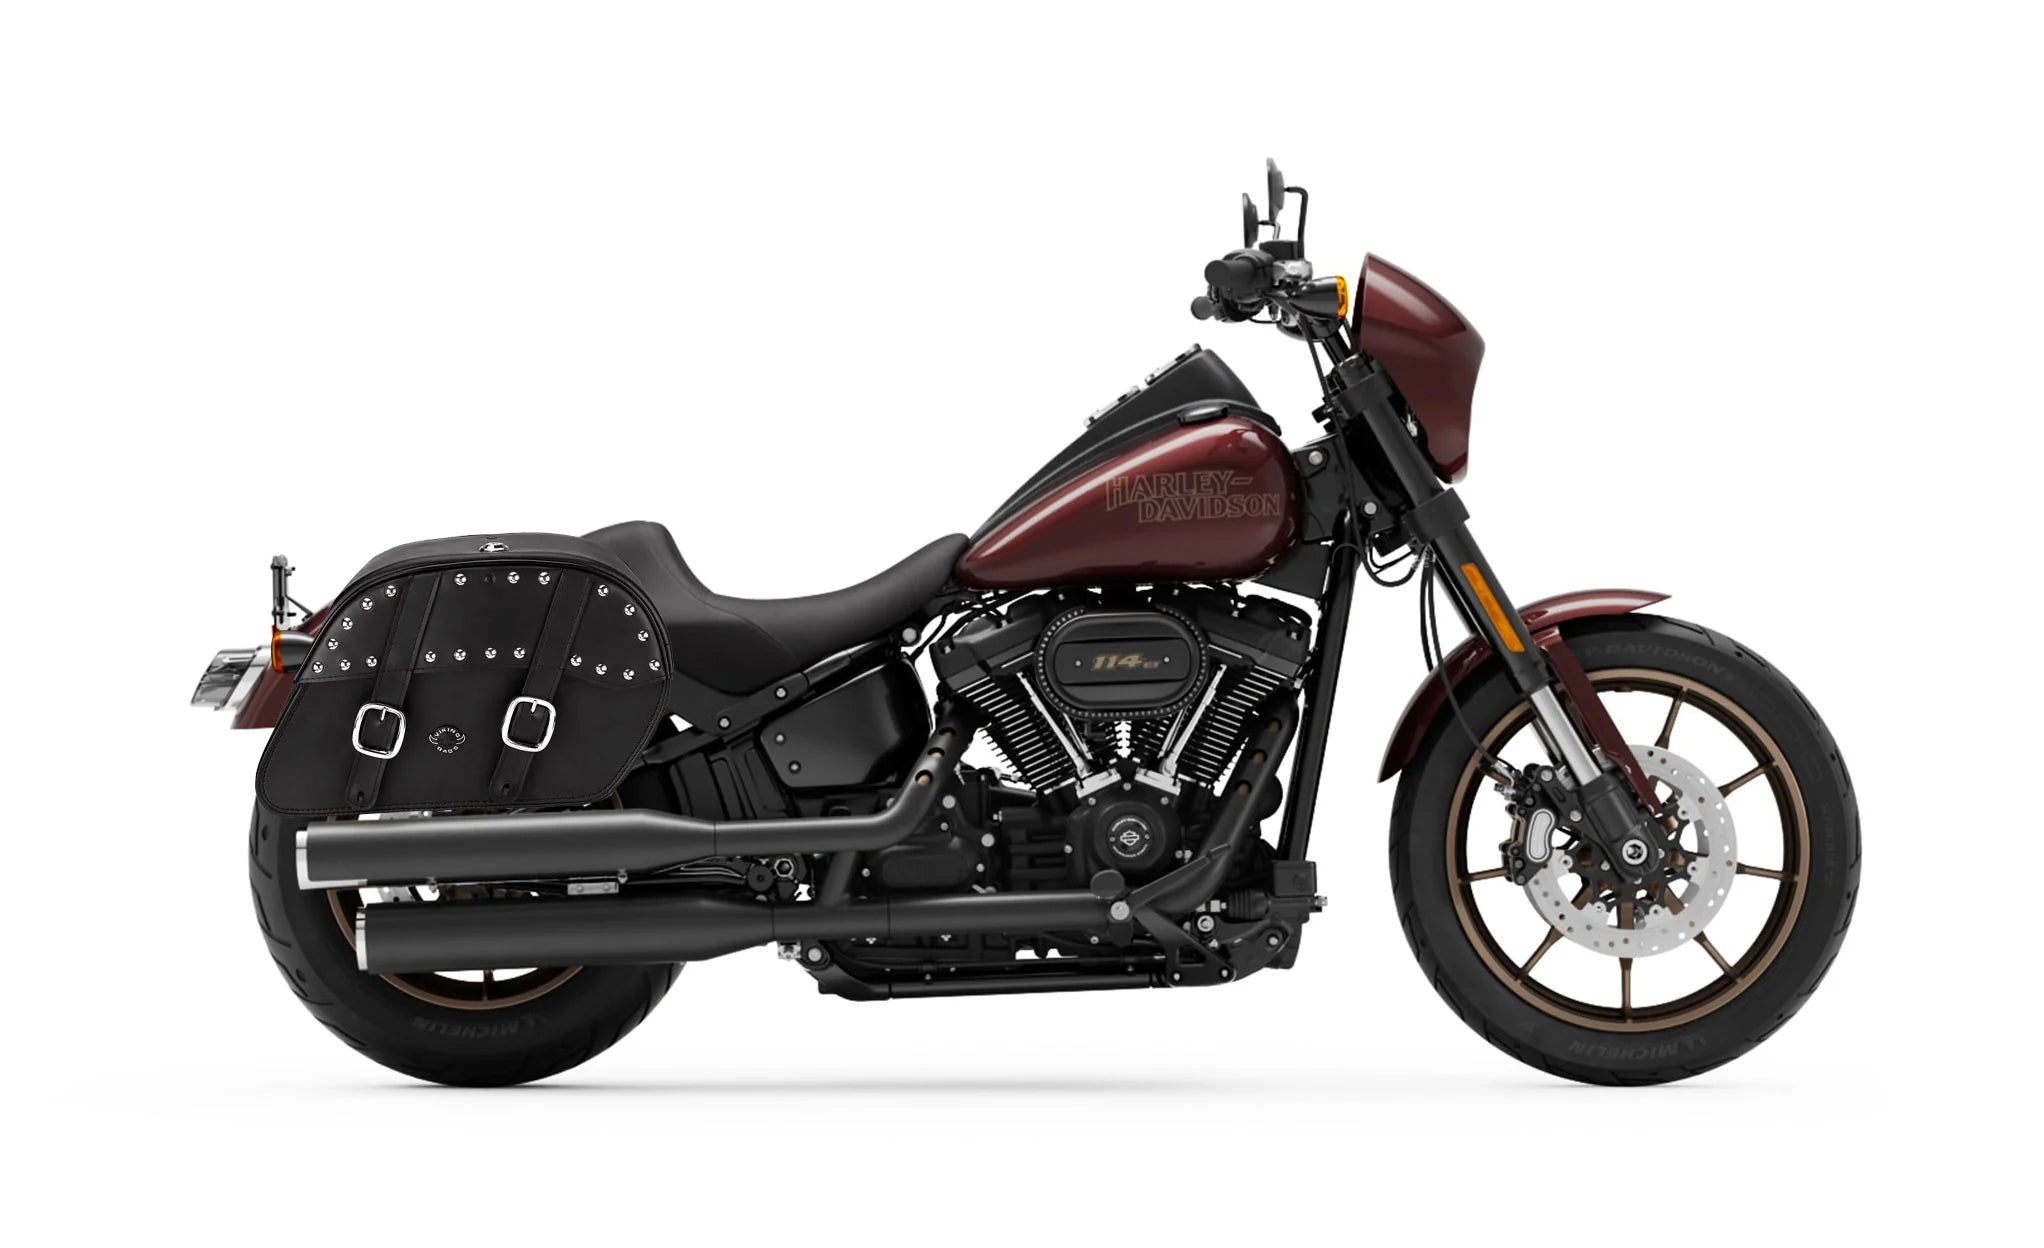 Viking Skarner Large Leather Studded Motorcycle Saddlebags For Harley Softail Low Rider S Fxlrs on Bike Photo @expand